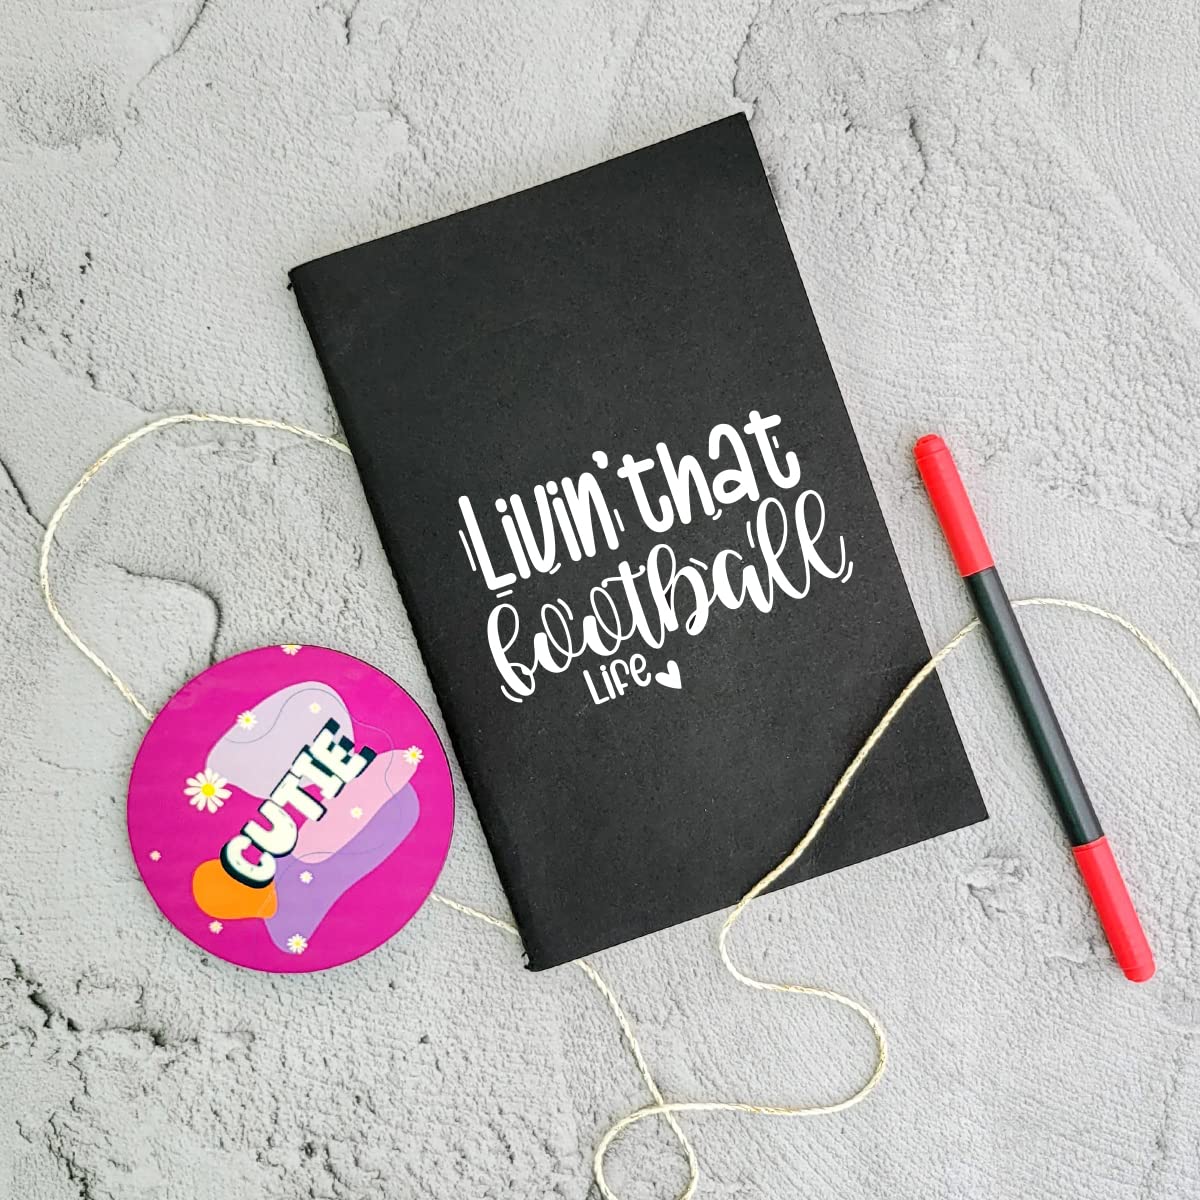 Living That Football Life - Black A5 Doodle Notebook - Kraft Cover Notebook - A5 - 300 GSM Kraft Cover - Handmade - Unruled - 80 Pages - Natural Shade Pages 120 GSM - Funny Quotes & Quirky, Funky designs